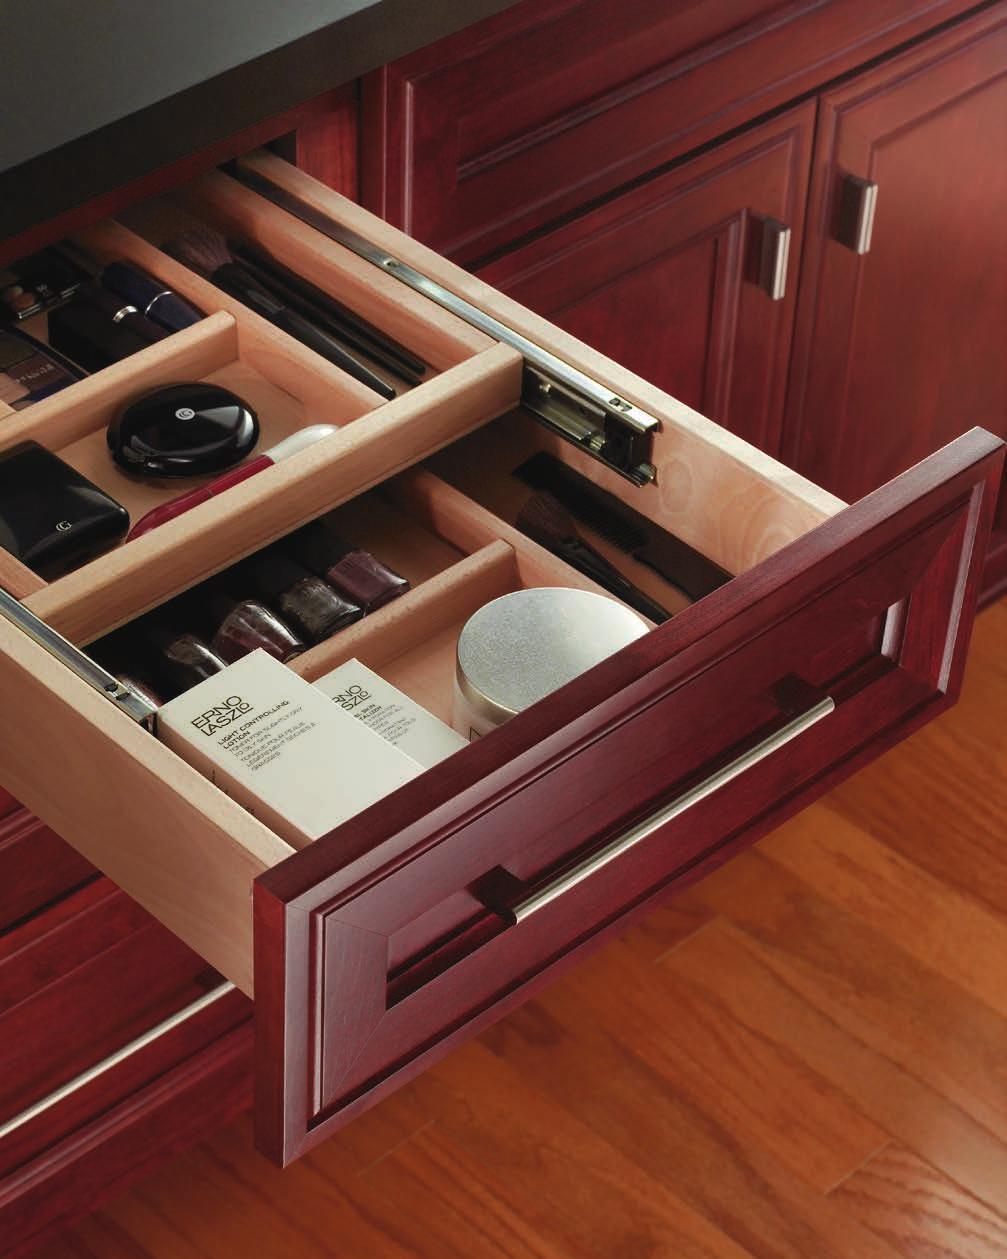 Cabinetry features doors with reversed raised center panels and five-piece mitered drawer front